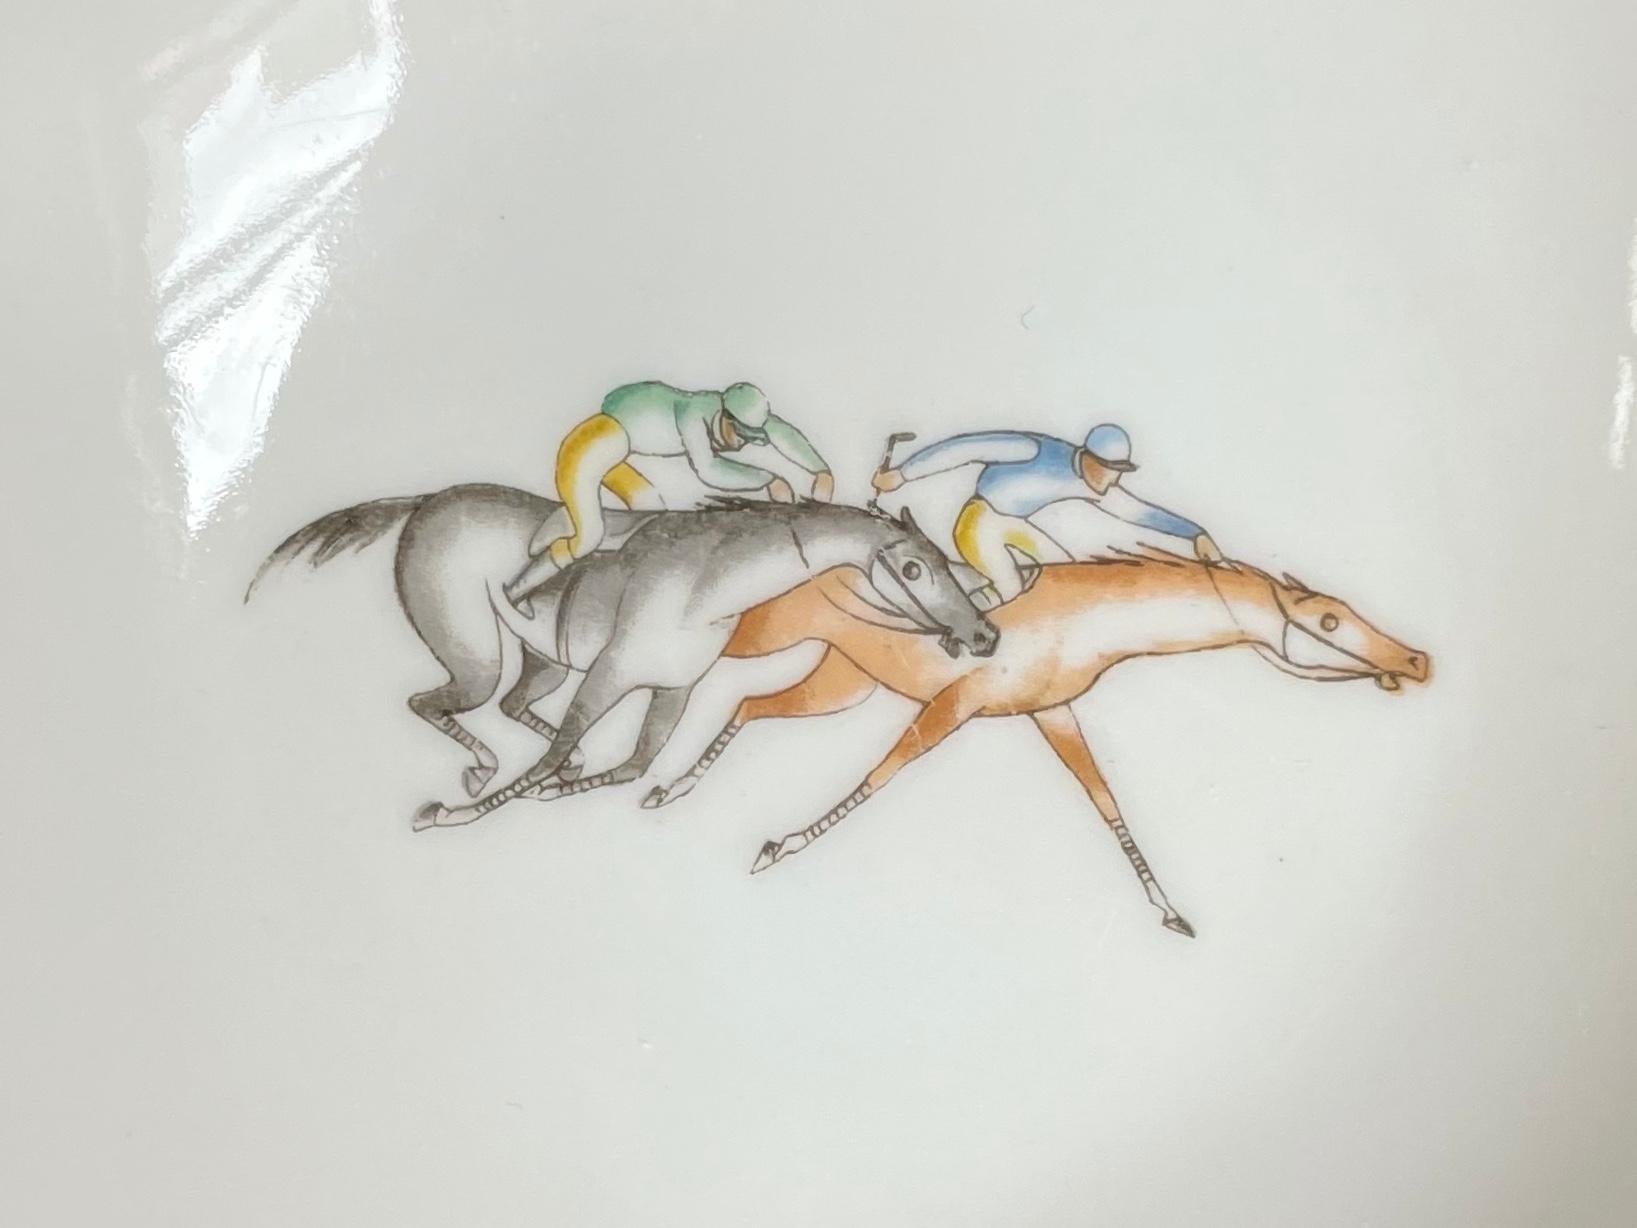 Gio Ponti for Ginori athletic dish. Vintage Richard Ginori shaped nut dish/ small saucer from the athletic series designed by Gio Ponti featuring a horse racing pair of mounted jockeys at the Derby. Italy, circa 1930's
Dimensions: 5